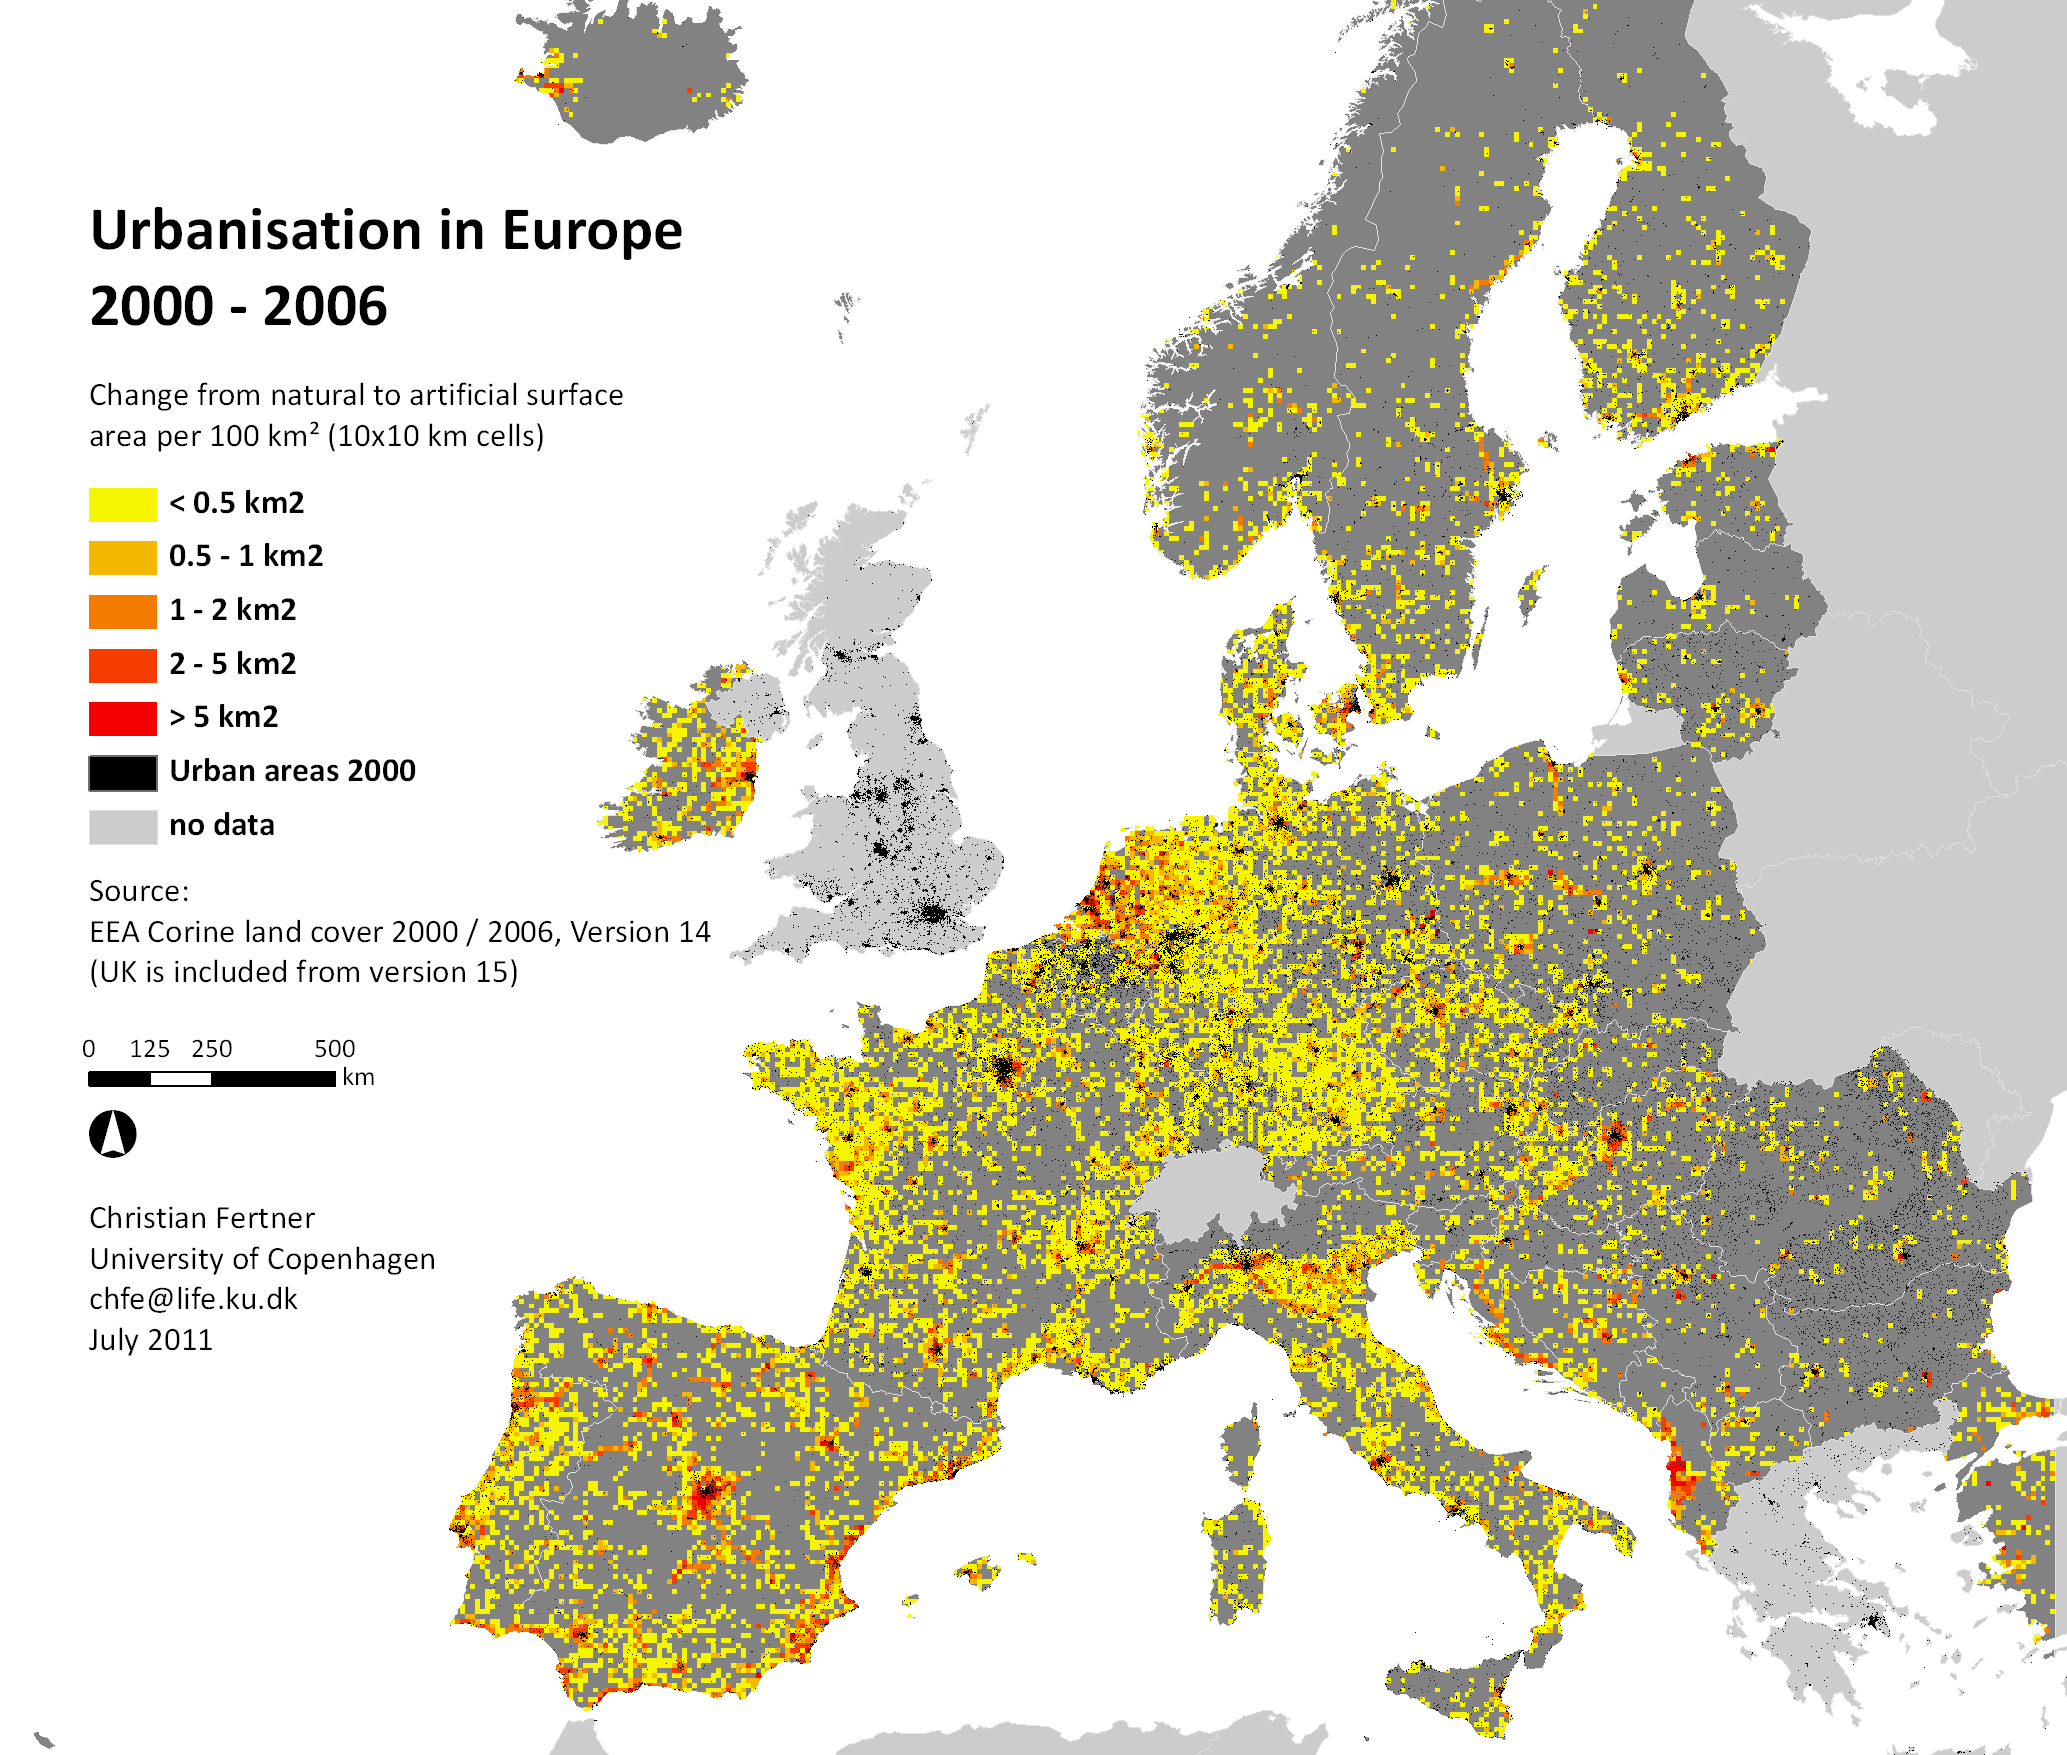 urbanisation in europe 2000-2006 | misc. on land use planning (with